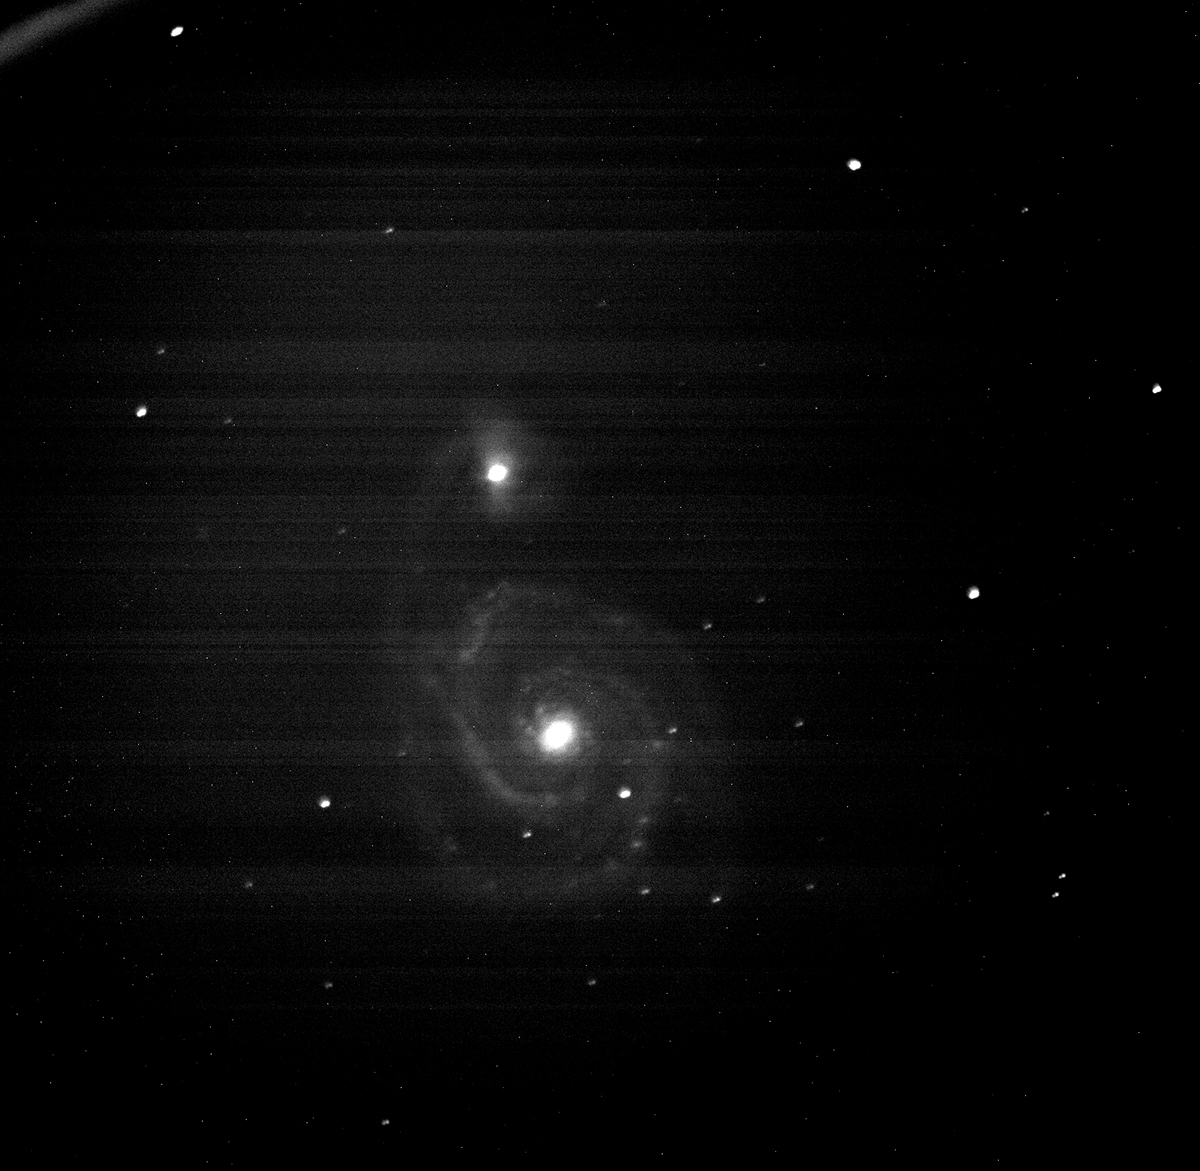 A section of the Whirlpool Galaxy in a photo taken by Dr. Katelyn Stringer, an MTSU alumna, in 2013 while attending the university. It is considered Messier Catalogue No. 51, one of French Astronomer Charles Messier’s 110 catalogued objects in the galaxy. It will be part of professor Chuck Higgins’ Star Party presentation, starting at 6:30 p.m. Friday, March 4, in Wiser-Patten Science Hall Room 102 (Submitted photo by Katelyn Stringer)